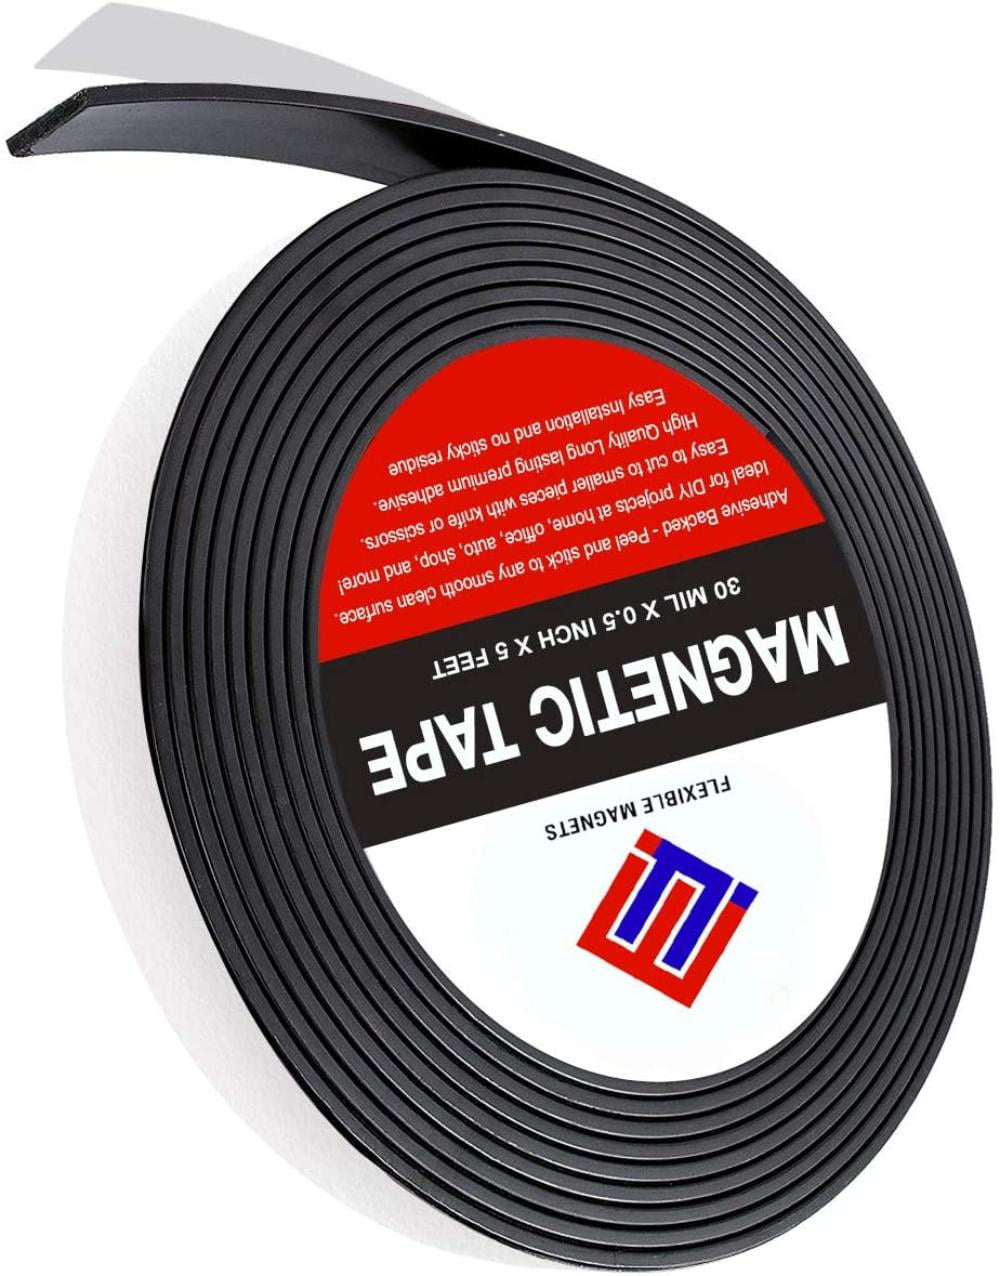 Magnet Valley 25 Adhesive Magnetic Circles 2 Diameter 30 mil Magnets 